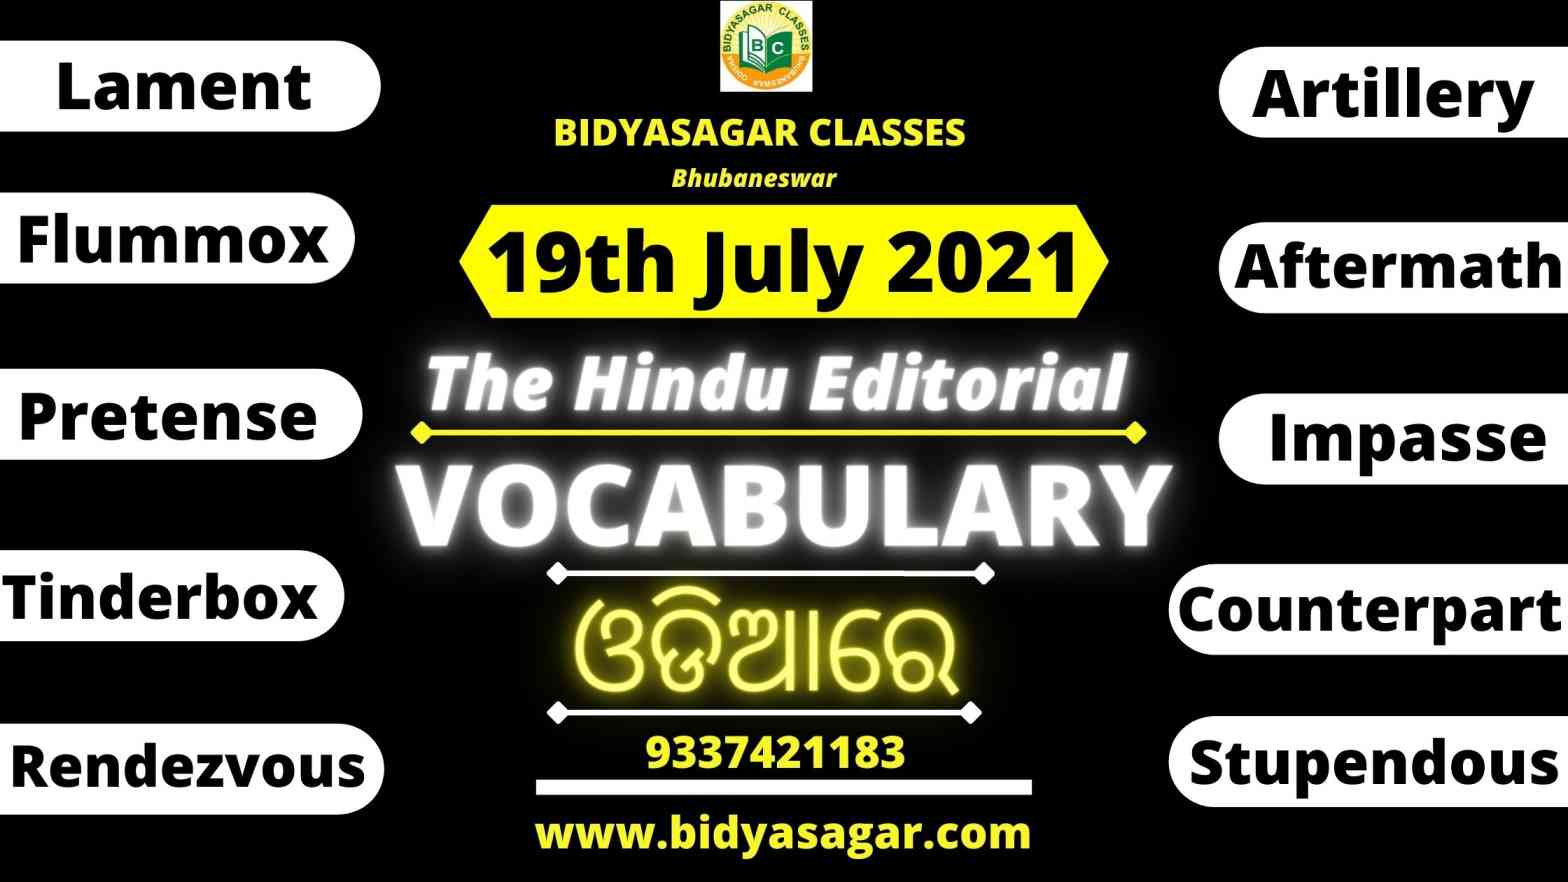 The Hindu Editorial VocaThe Hindu Editorial Vocabulary of 19th July 2021bulary of 19th July 2021